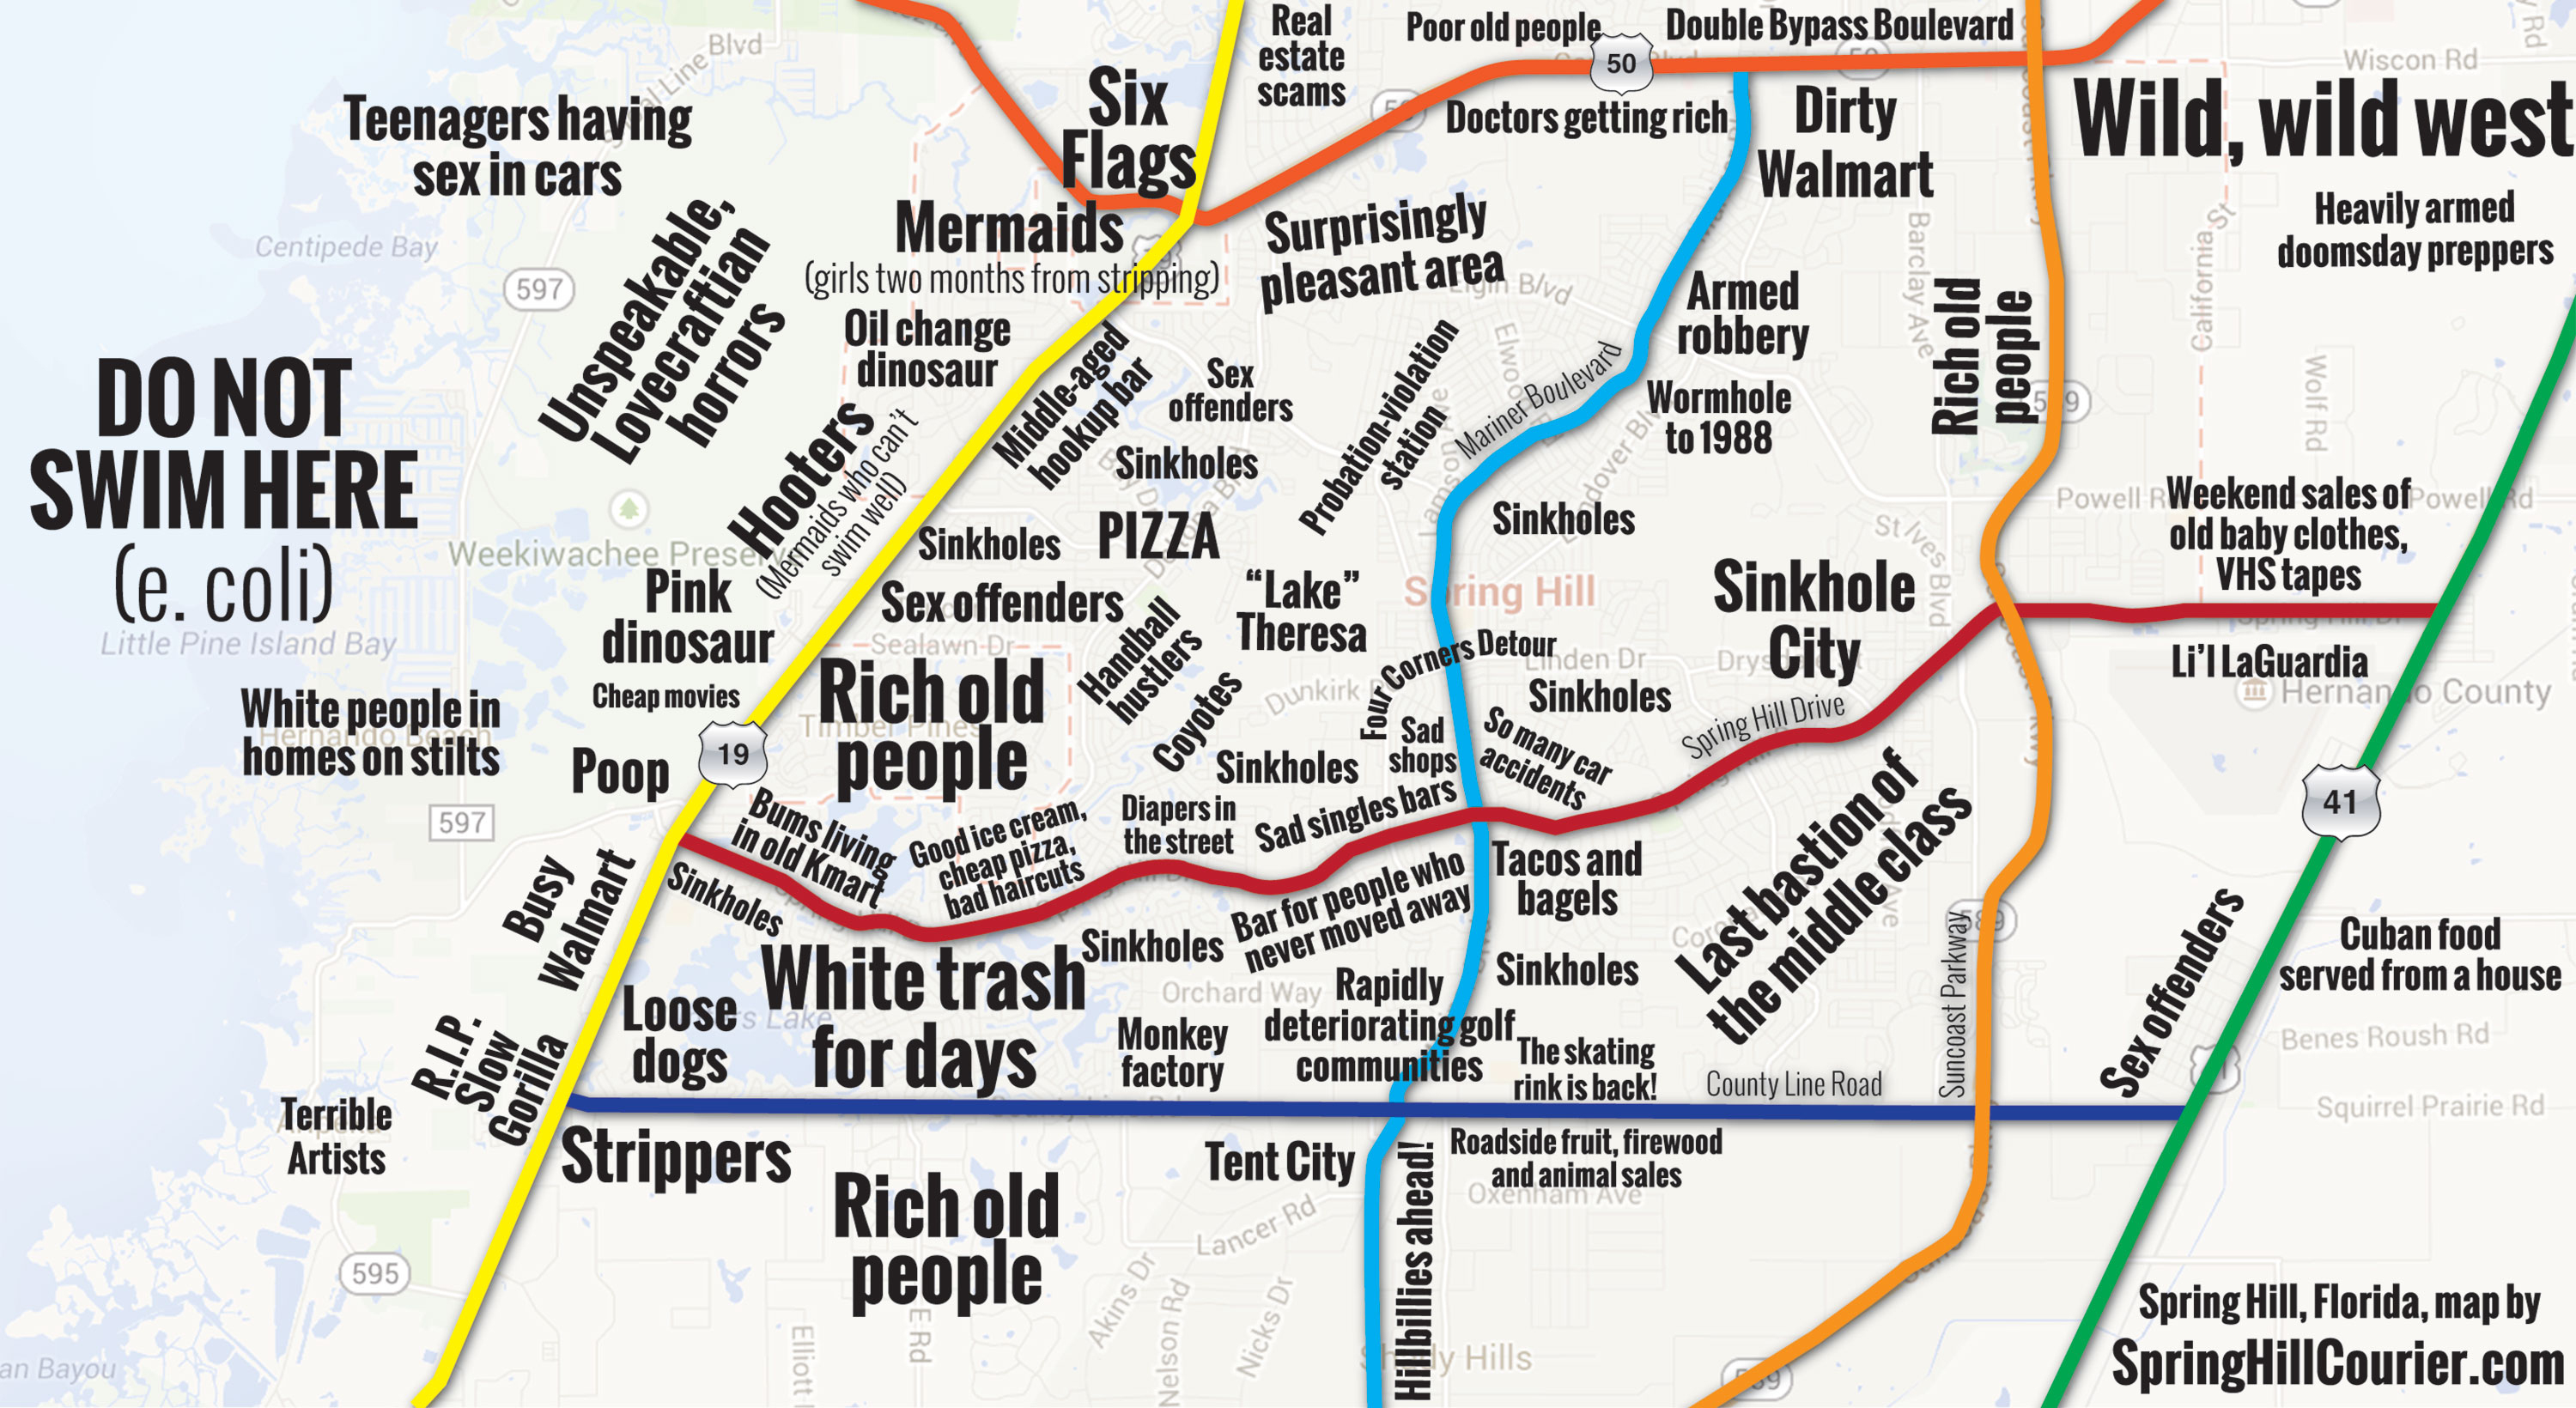 Judgmental Map Of Spring Hill - Spring Hill Courier - Map Of Natural Springs In Florida